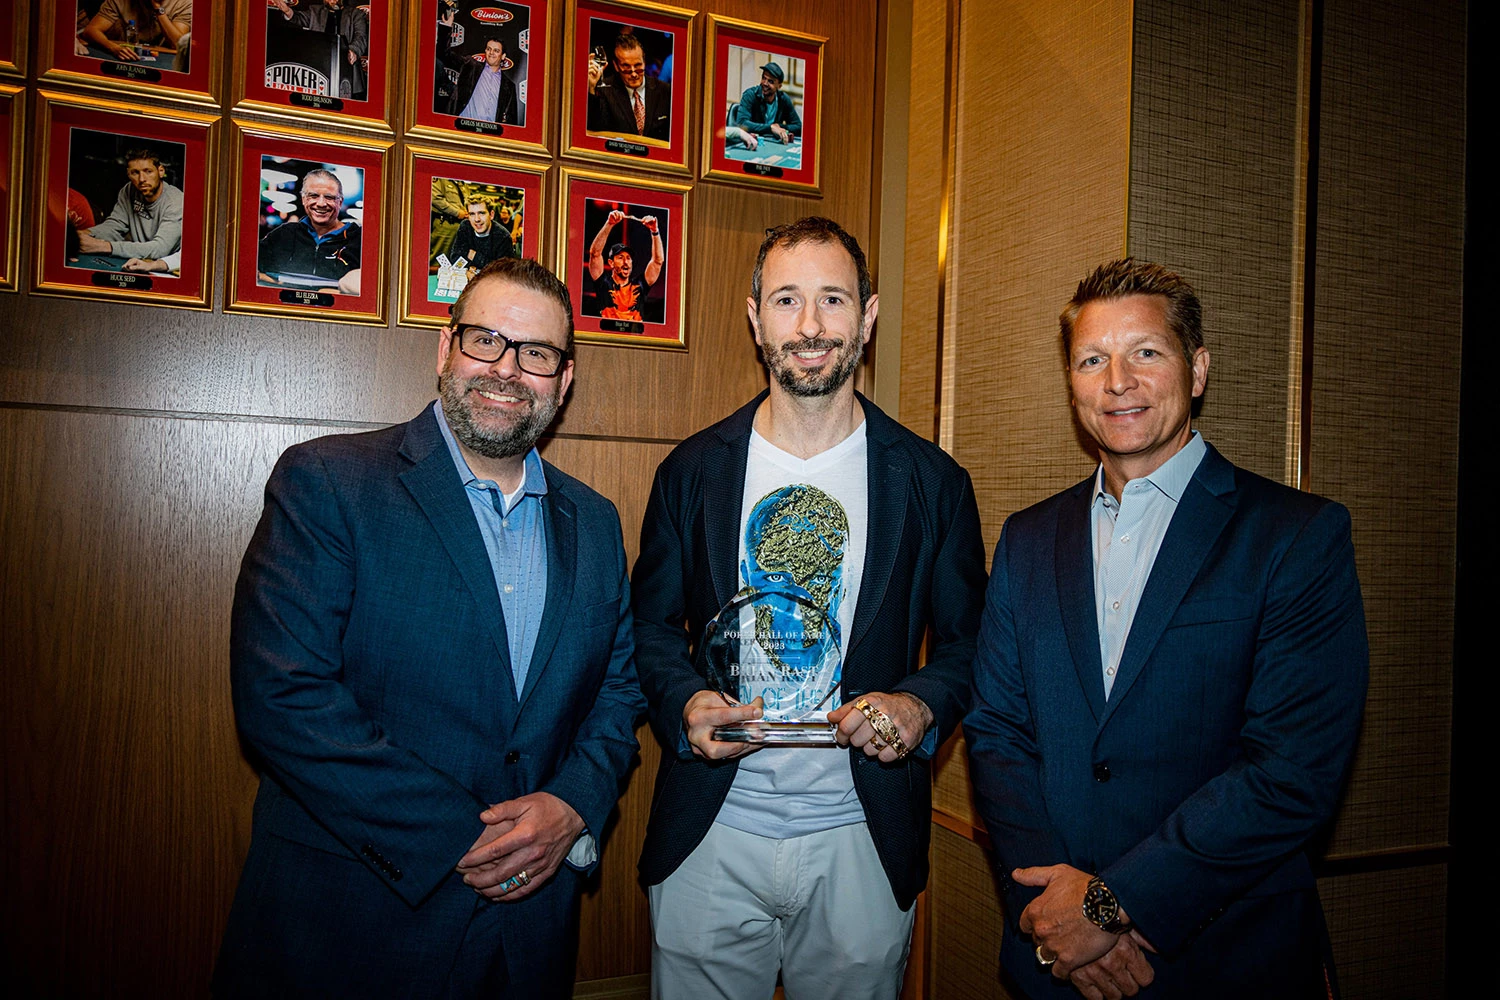 Brian Rast Inducted into the Poker Hall of Fame